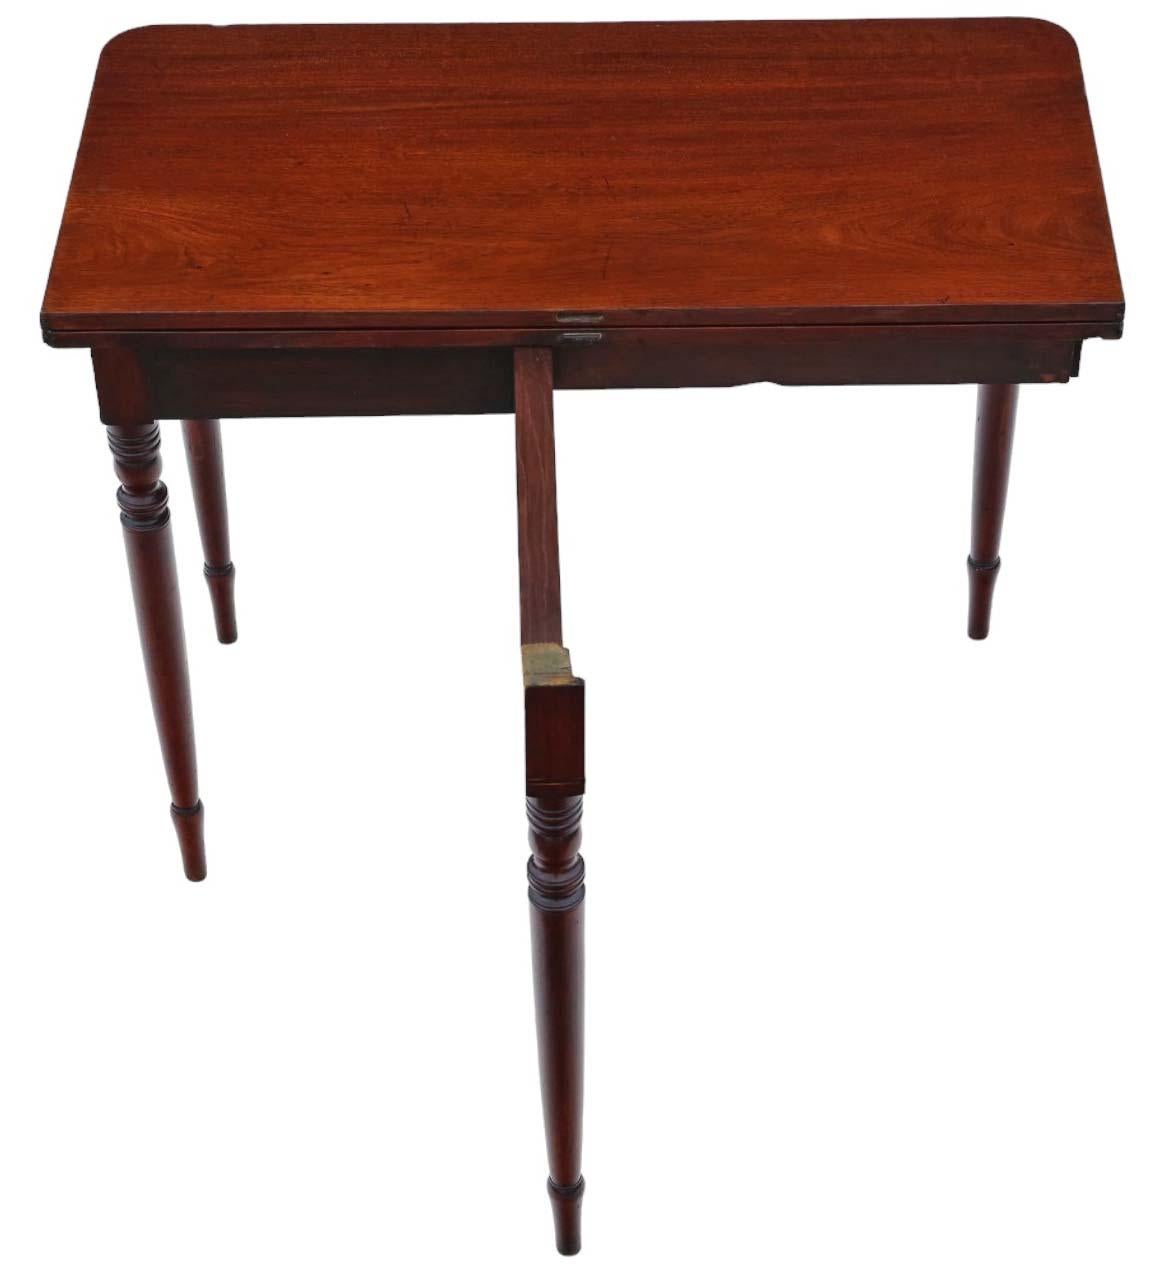 Antique Fine Quality C1800 Inlaid Mahogany Folding Card or Tea Table - Side For Sale 4